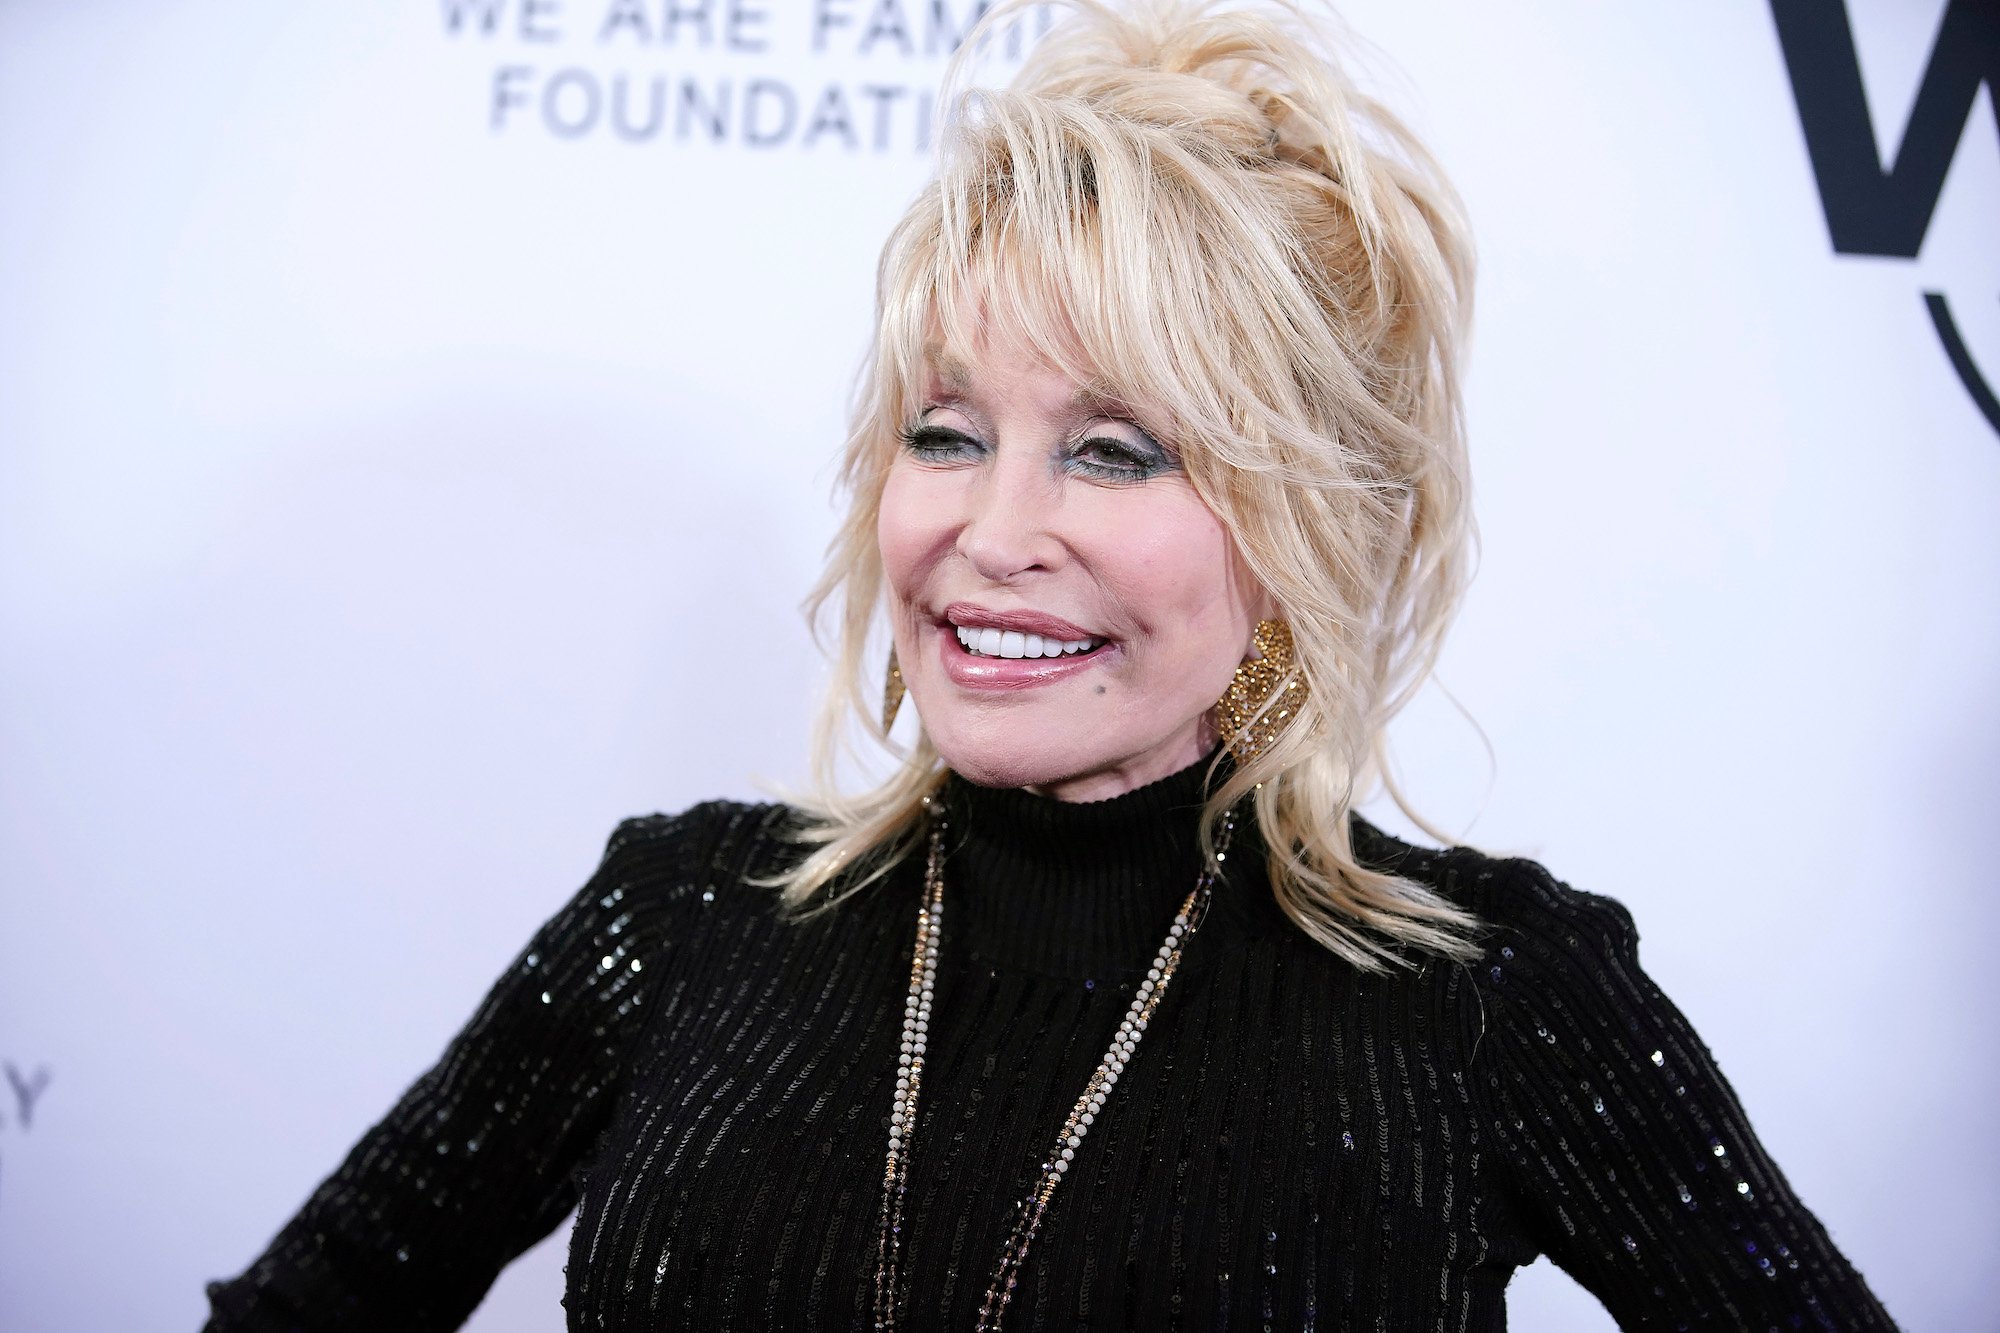 Dolly Parton attending the We Are Family Foundation Honors event in 2019